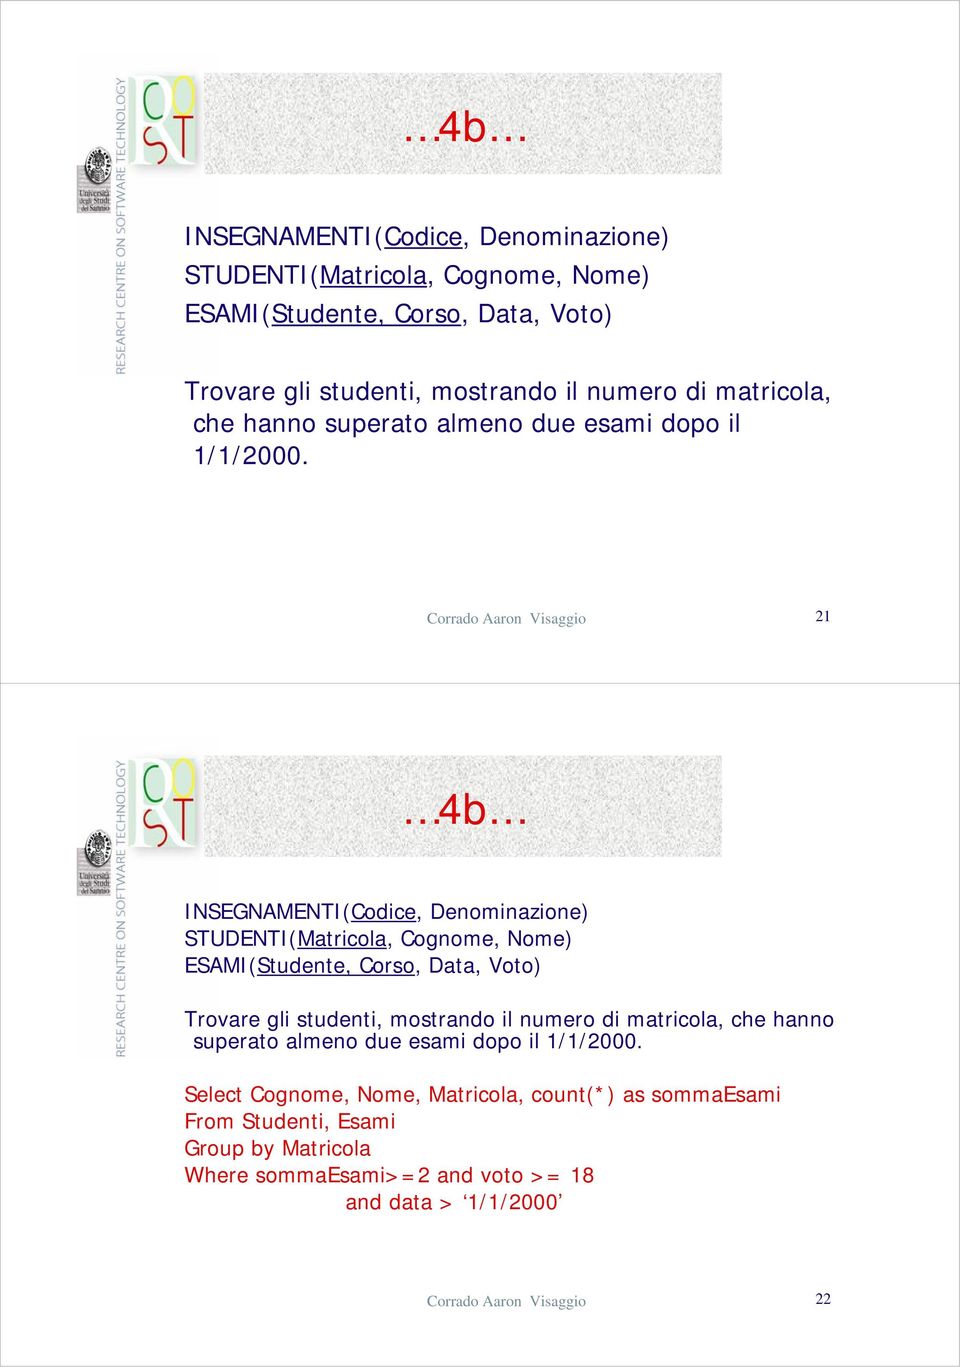 Select Cognome, Nome, Matricola, count(*) as sommaesami From Studenti, Esami Group by Matricola Where sommaesami>=2 and voto >= 18 and data > 1/1/2000 Corrado